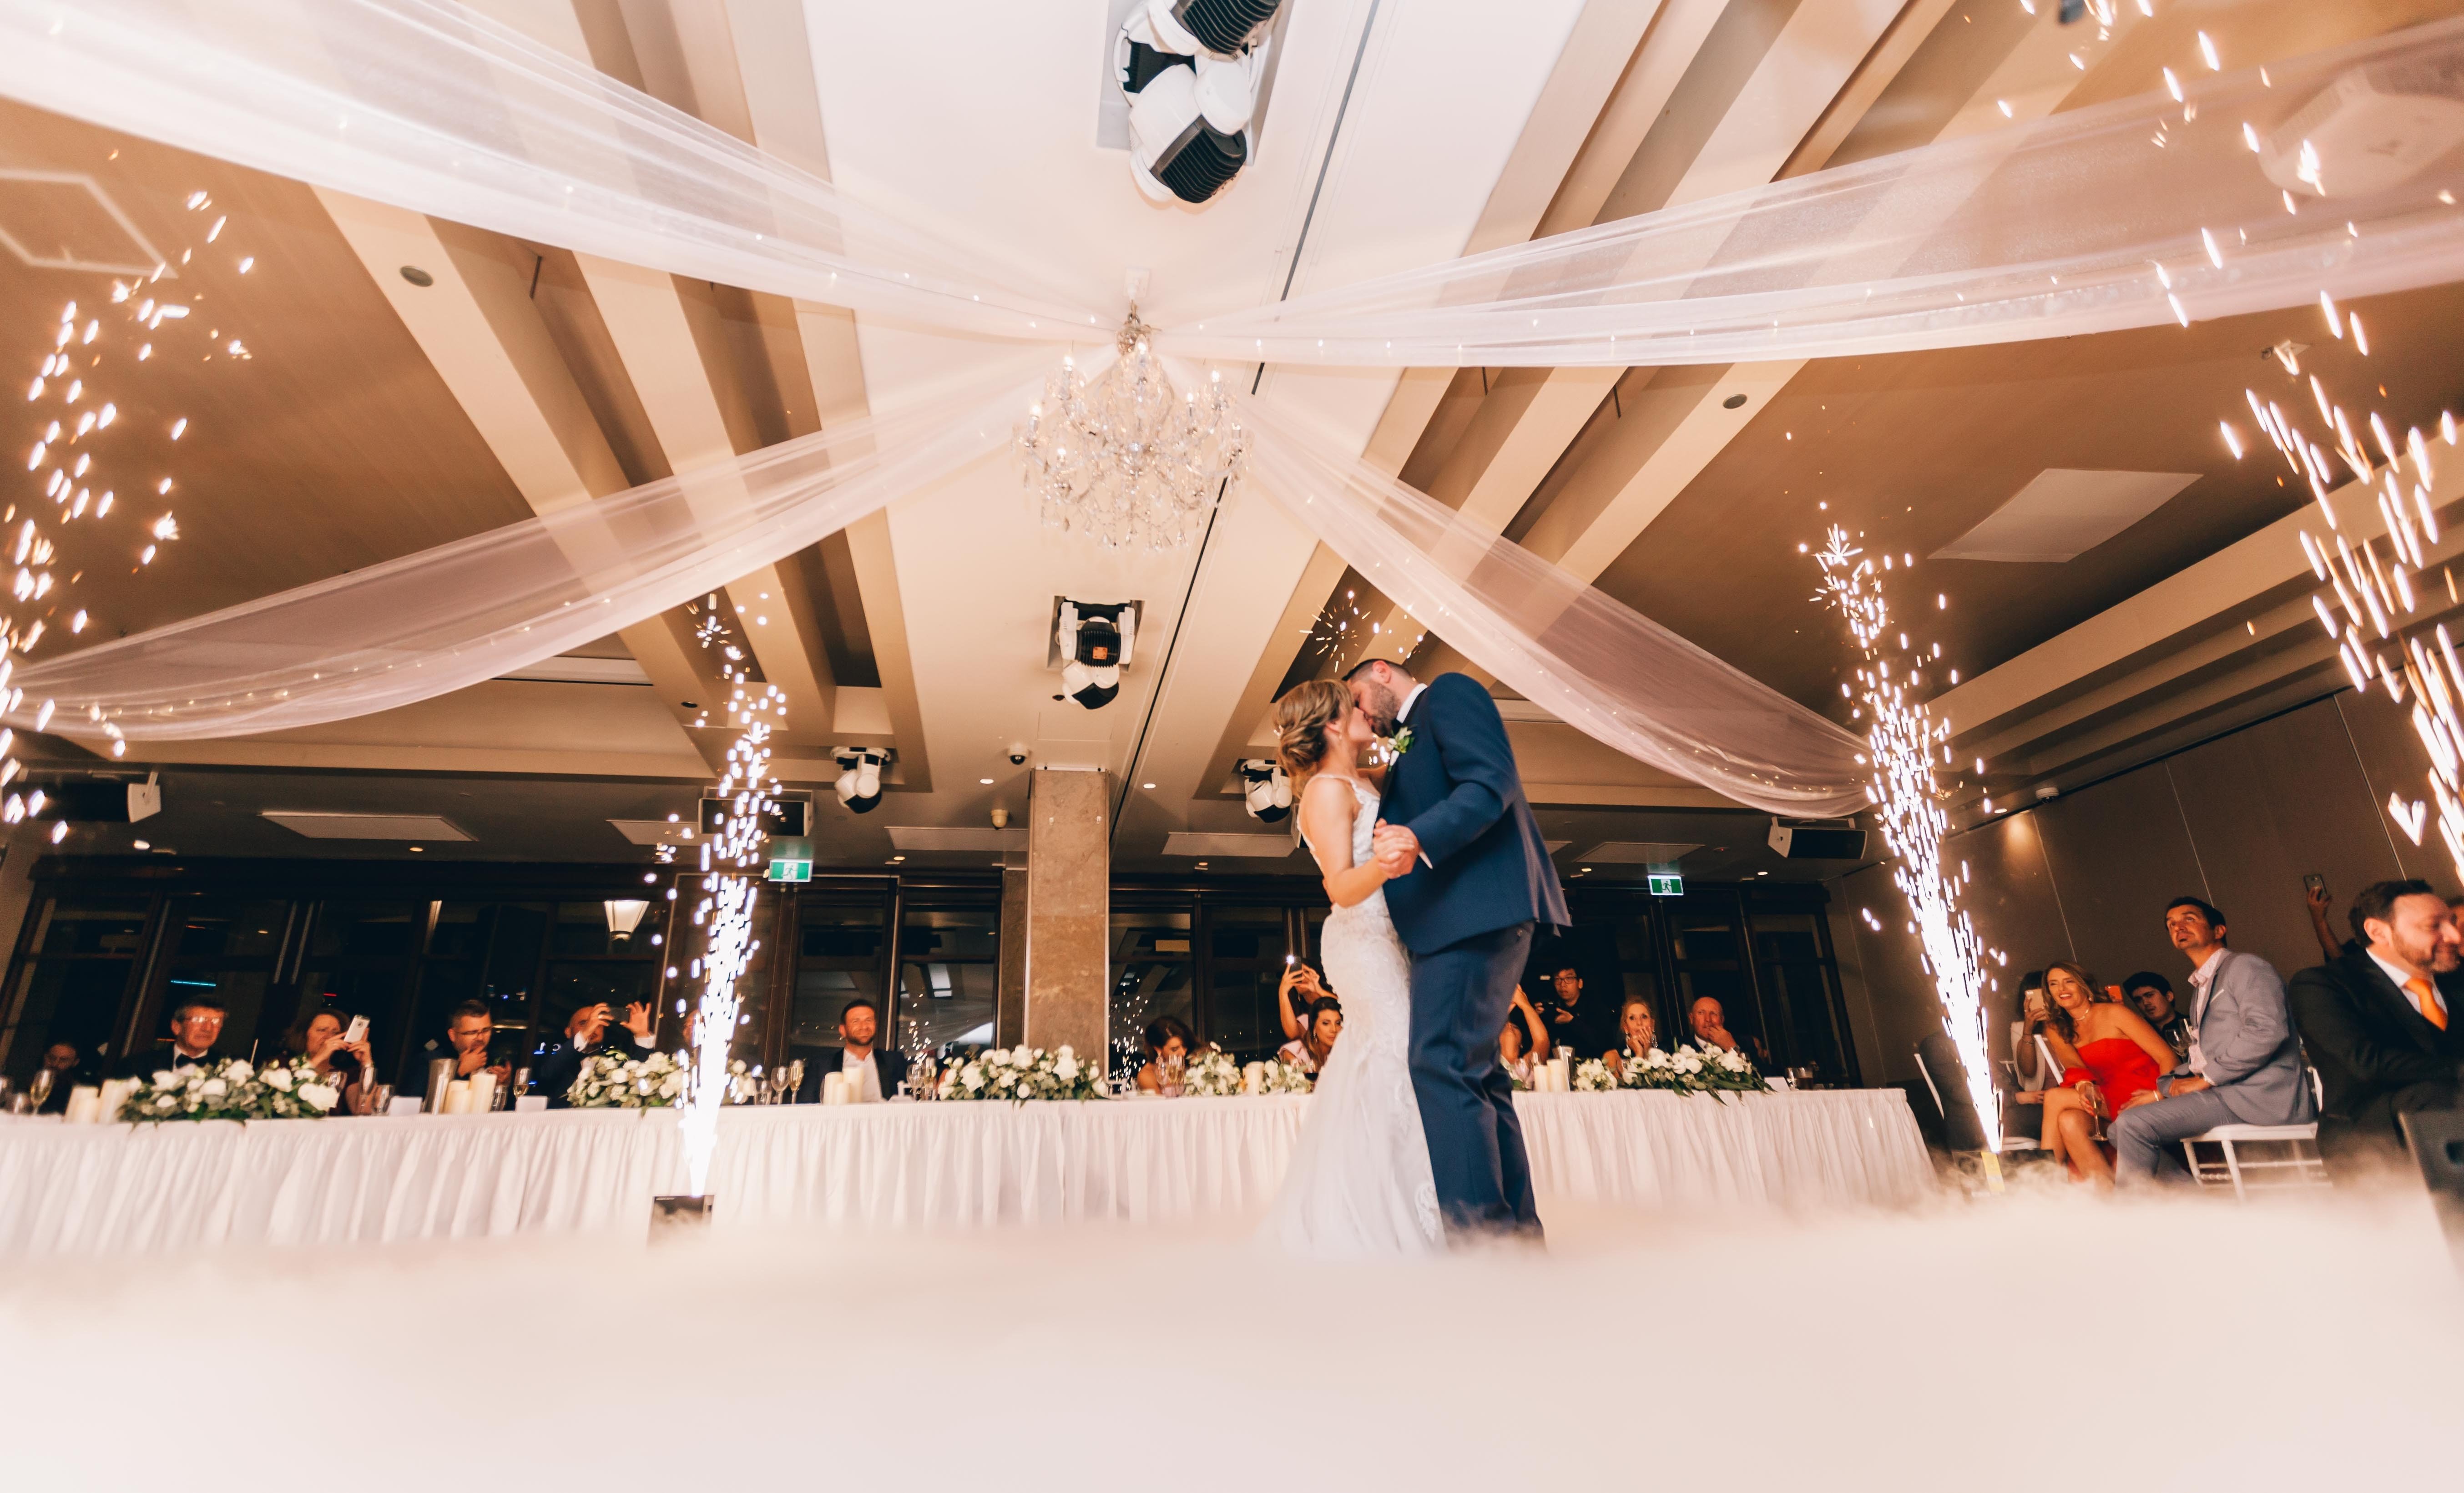 Alex and Melanie brought Sarah and Jeff with them, and they celebrated their special day together. | Source: Pexels